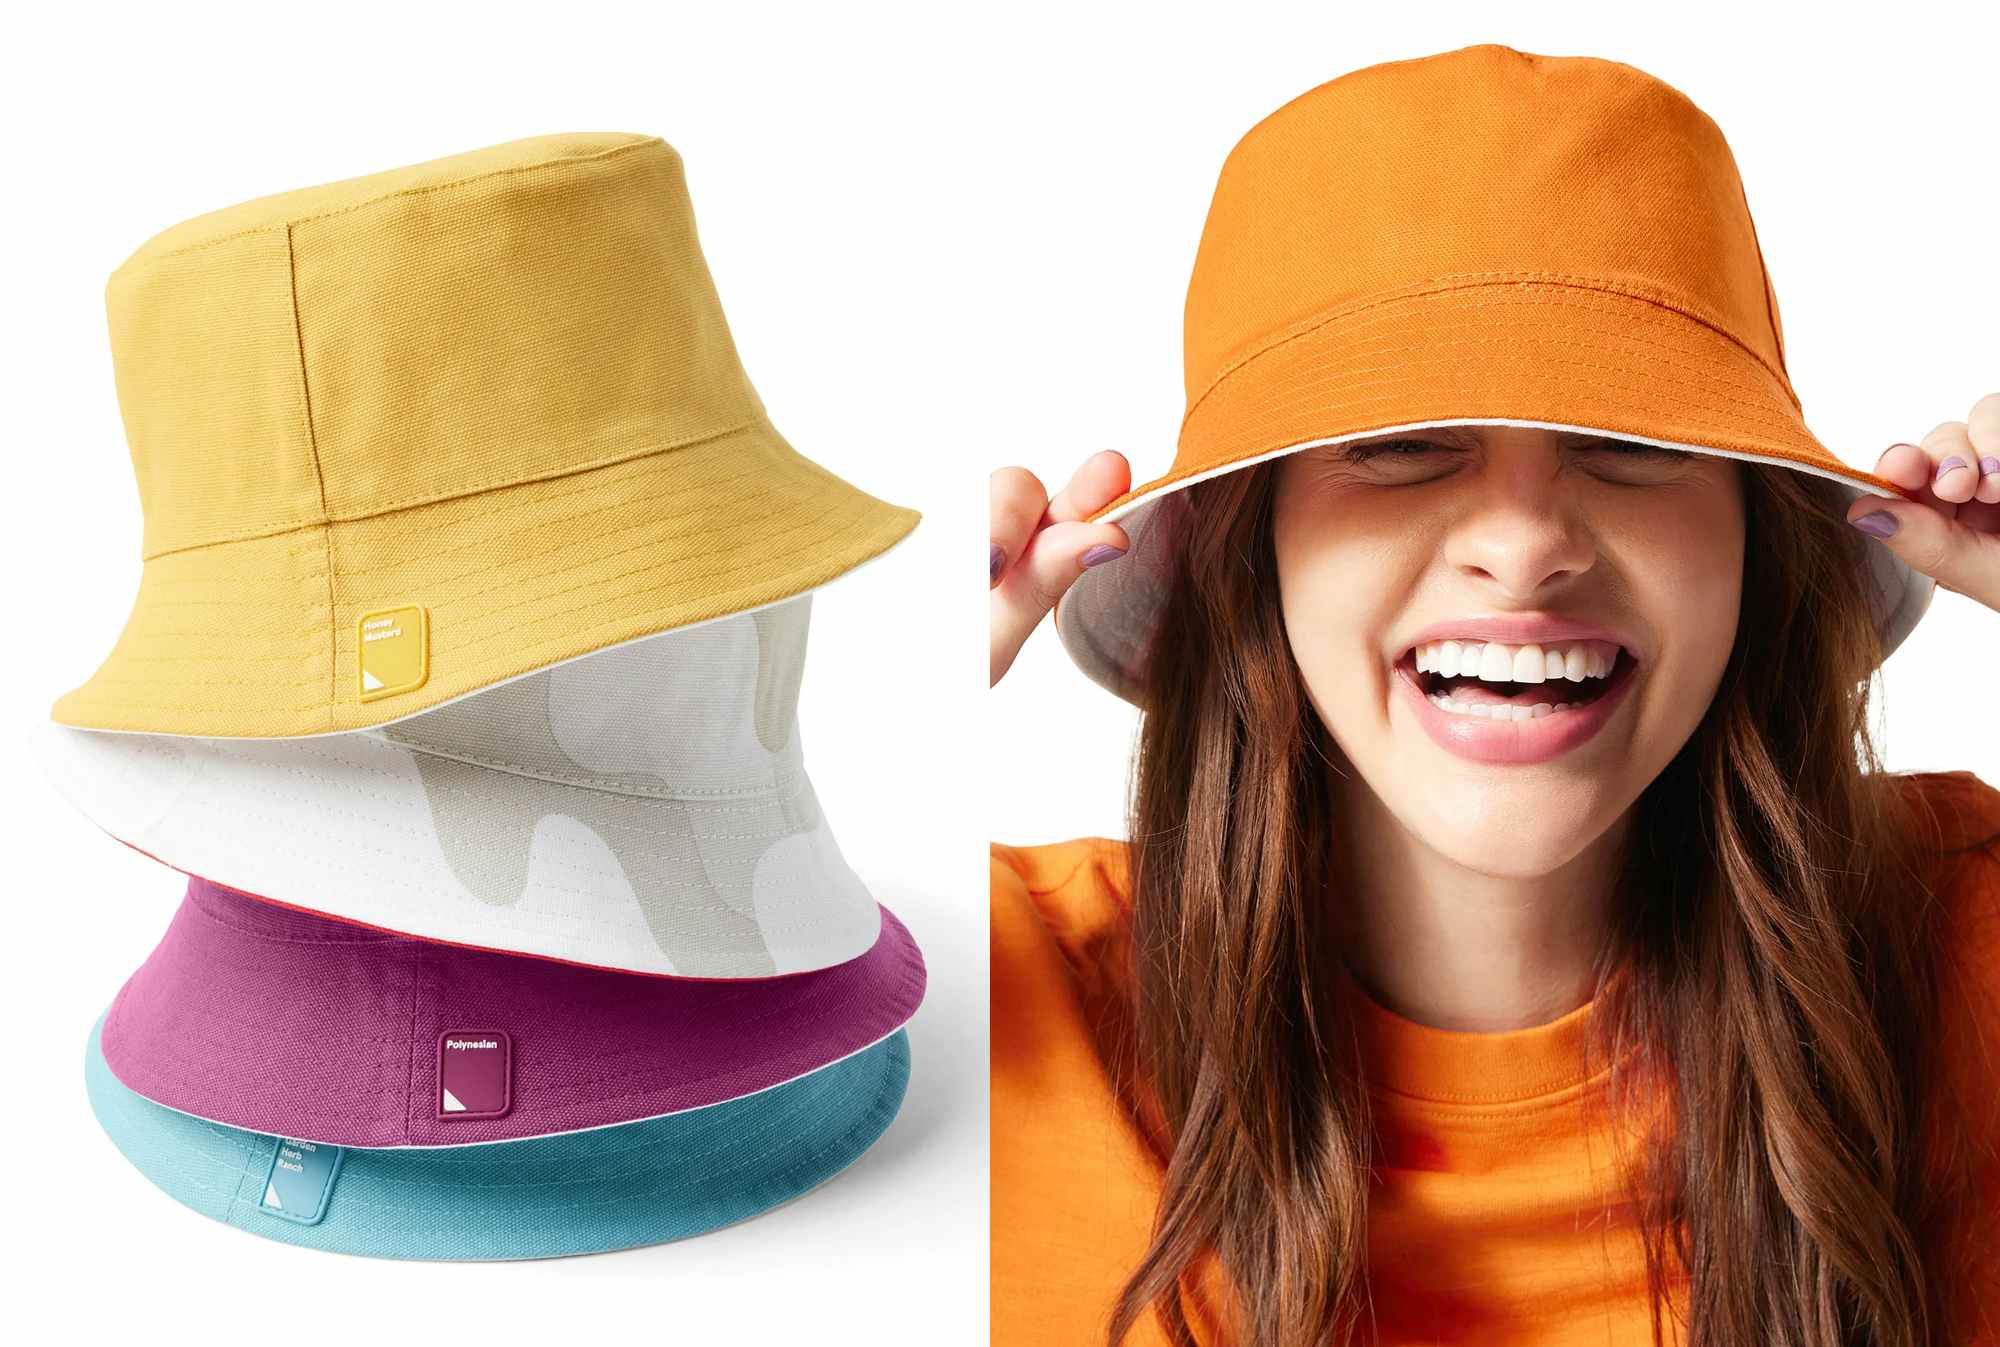 chick-fil-a sauce-inspired bucket hats